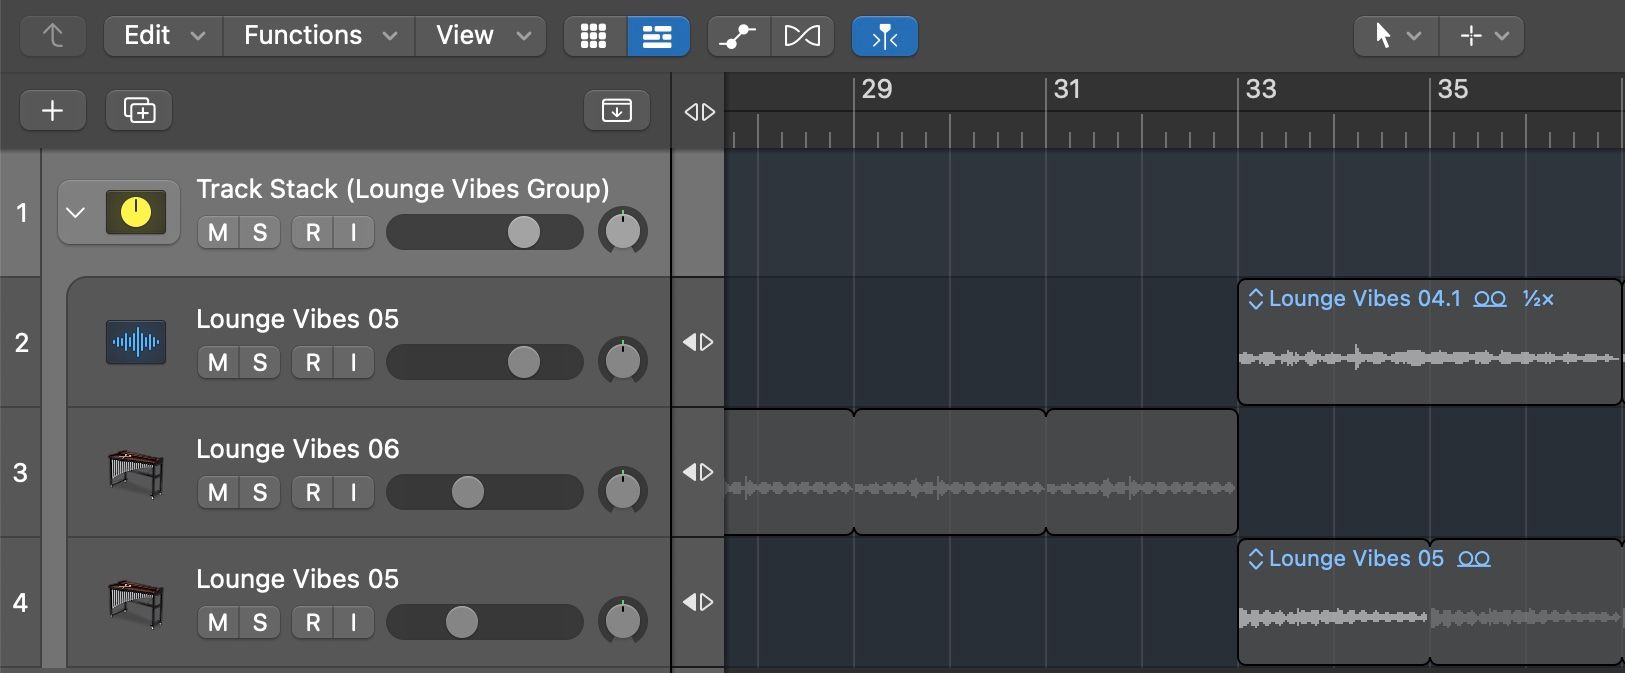 A screenshot showing three tracks grouped together using the Track Stack feature in Logic Pro X